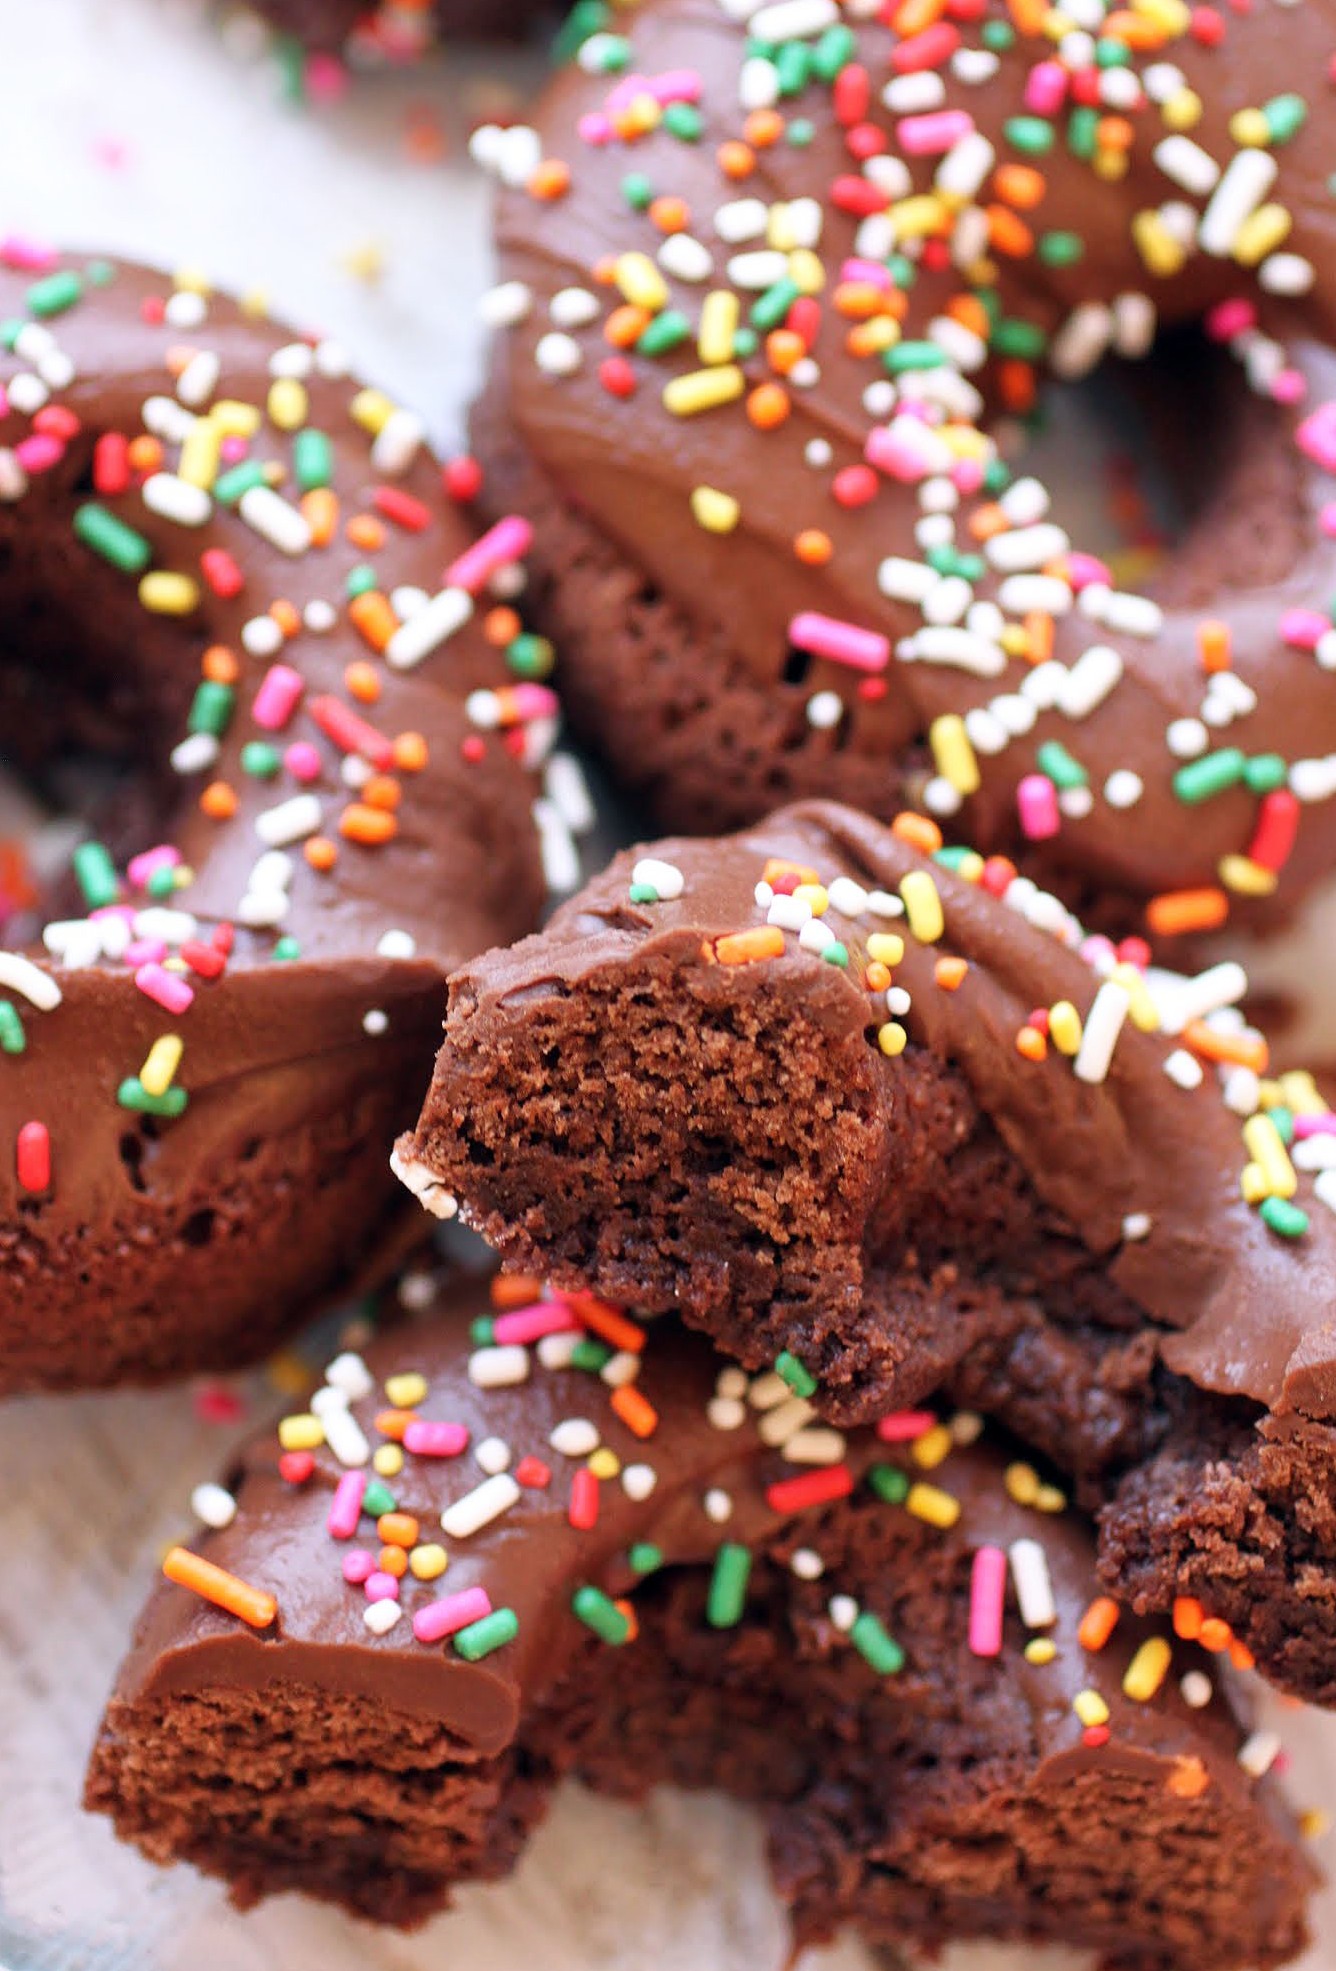 Chocolate Peanut Butter Donuts